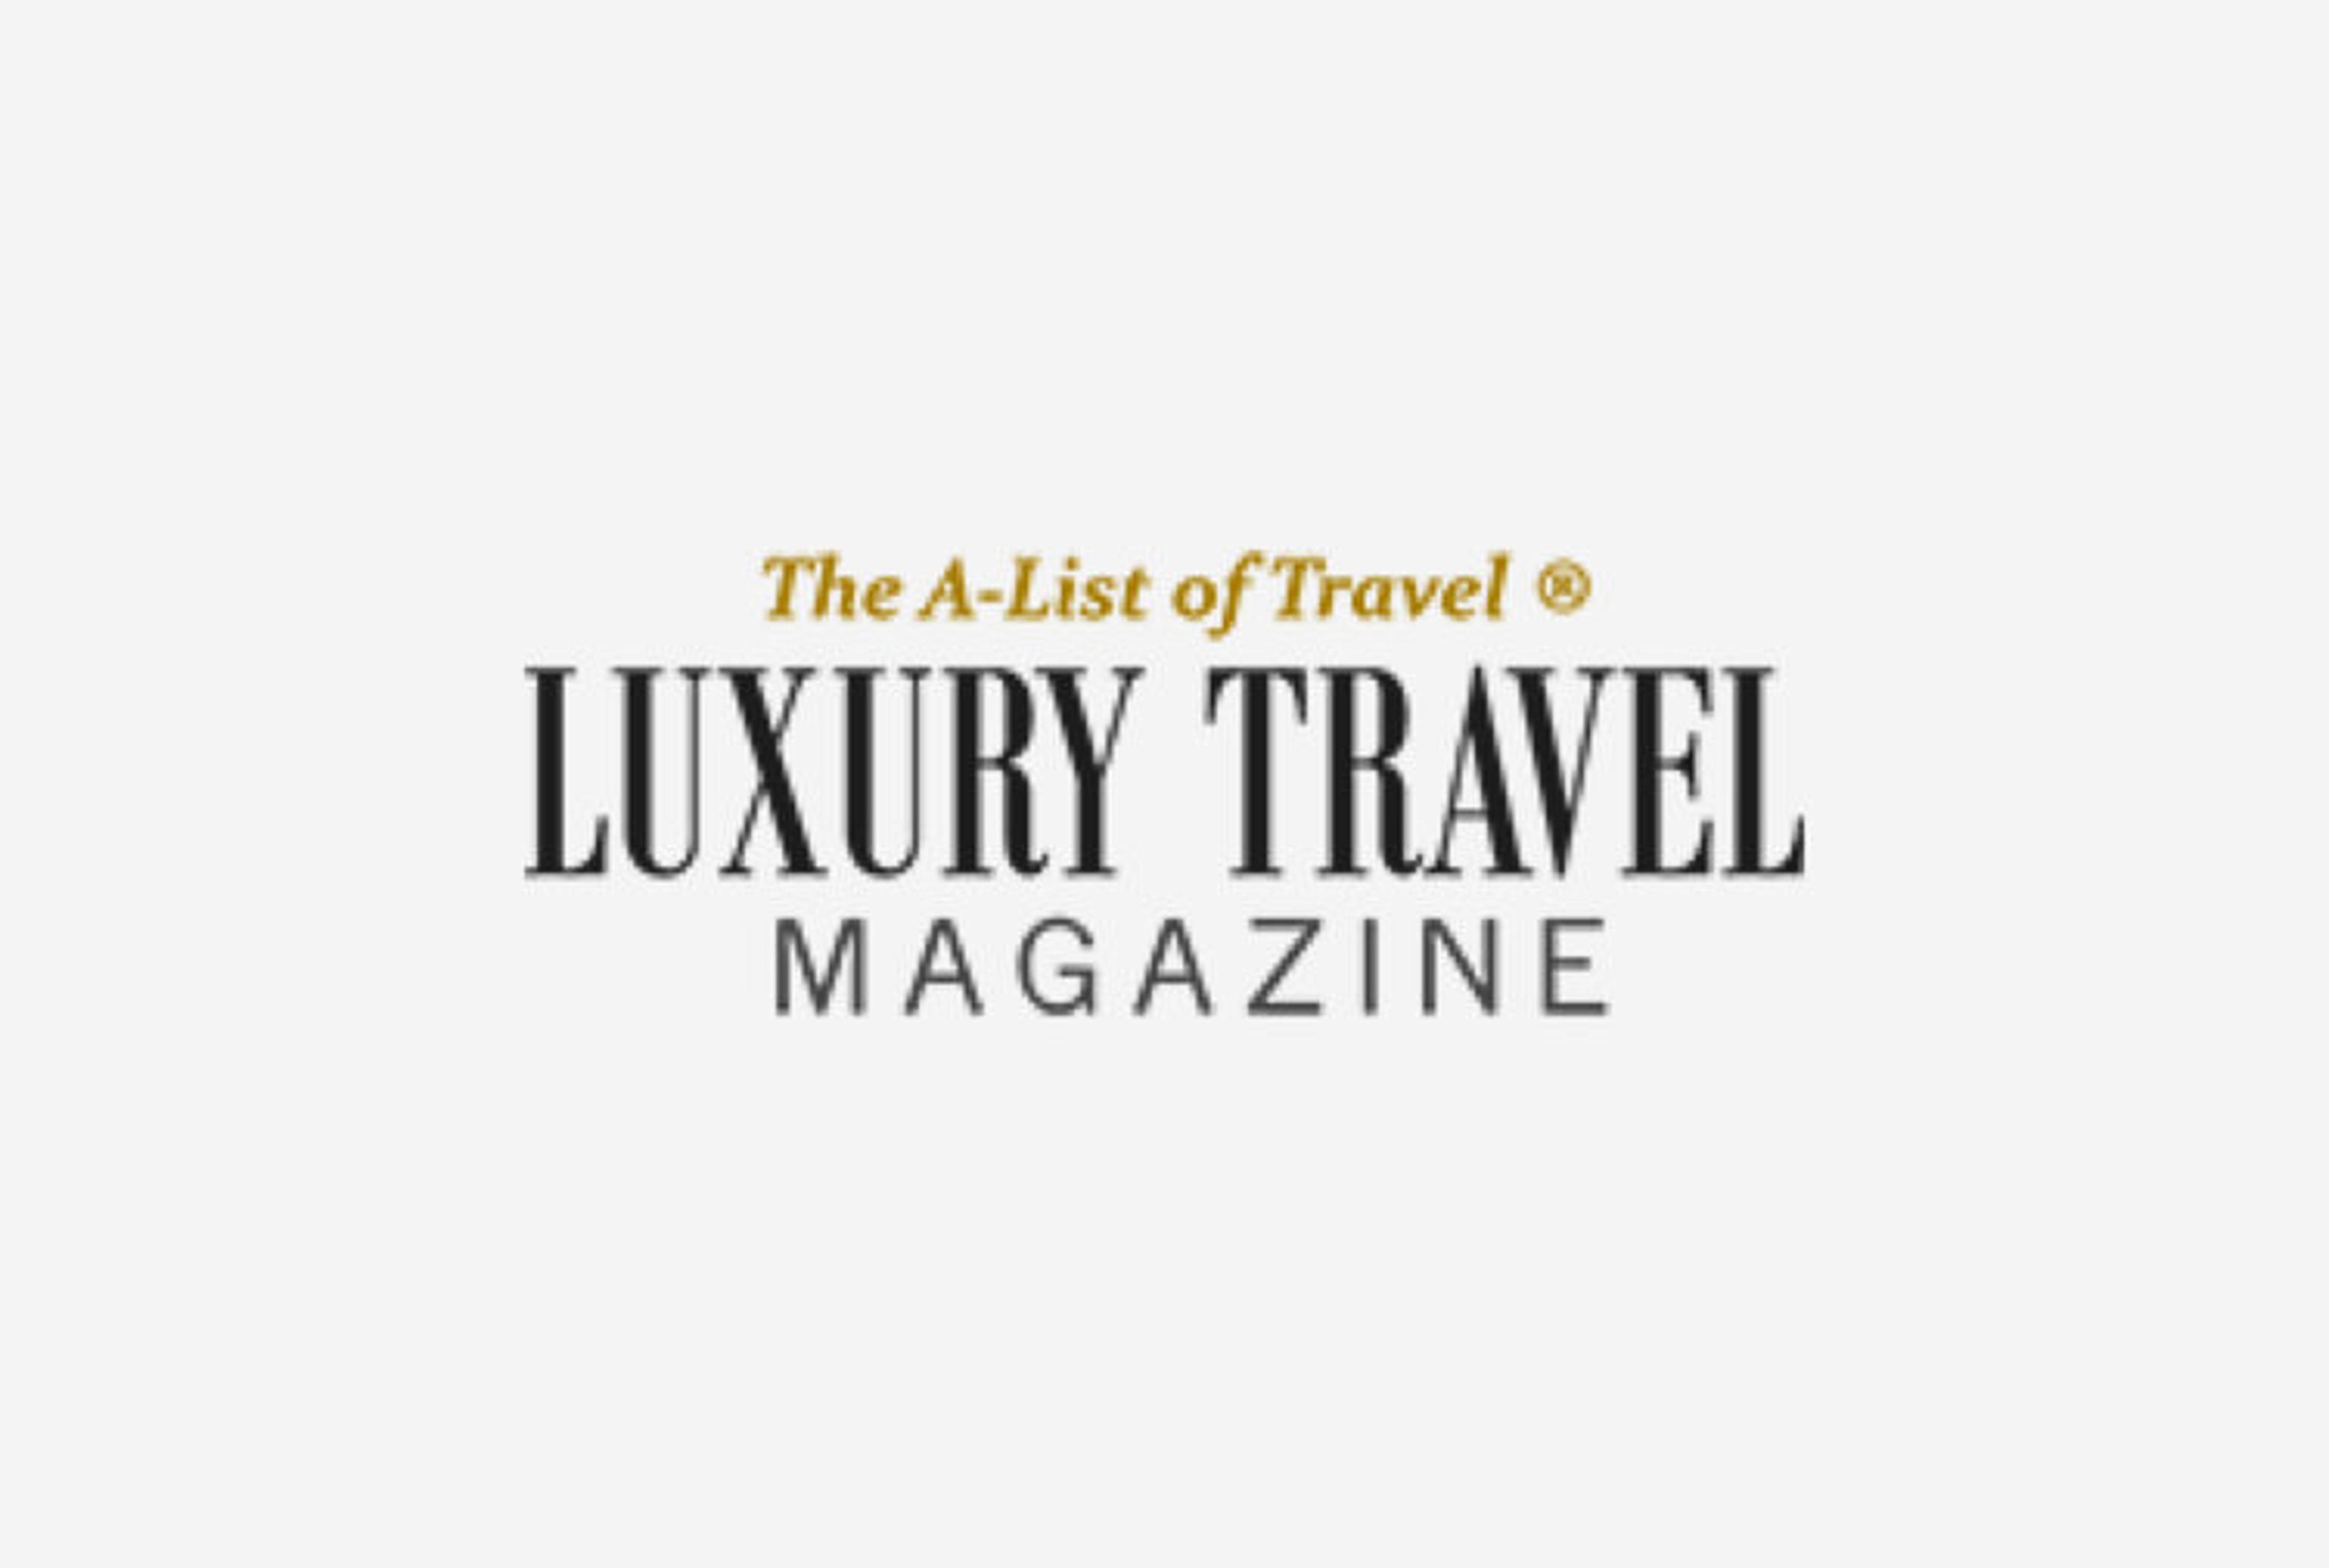 Space Perspective’s Private Luxury Space Travel Experience (Luxury Travel Magazine)